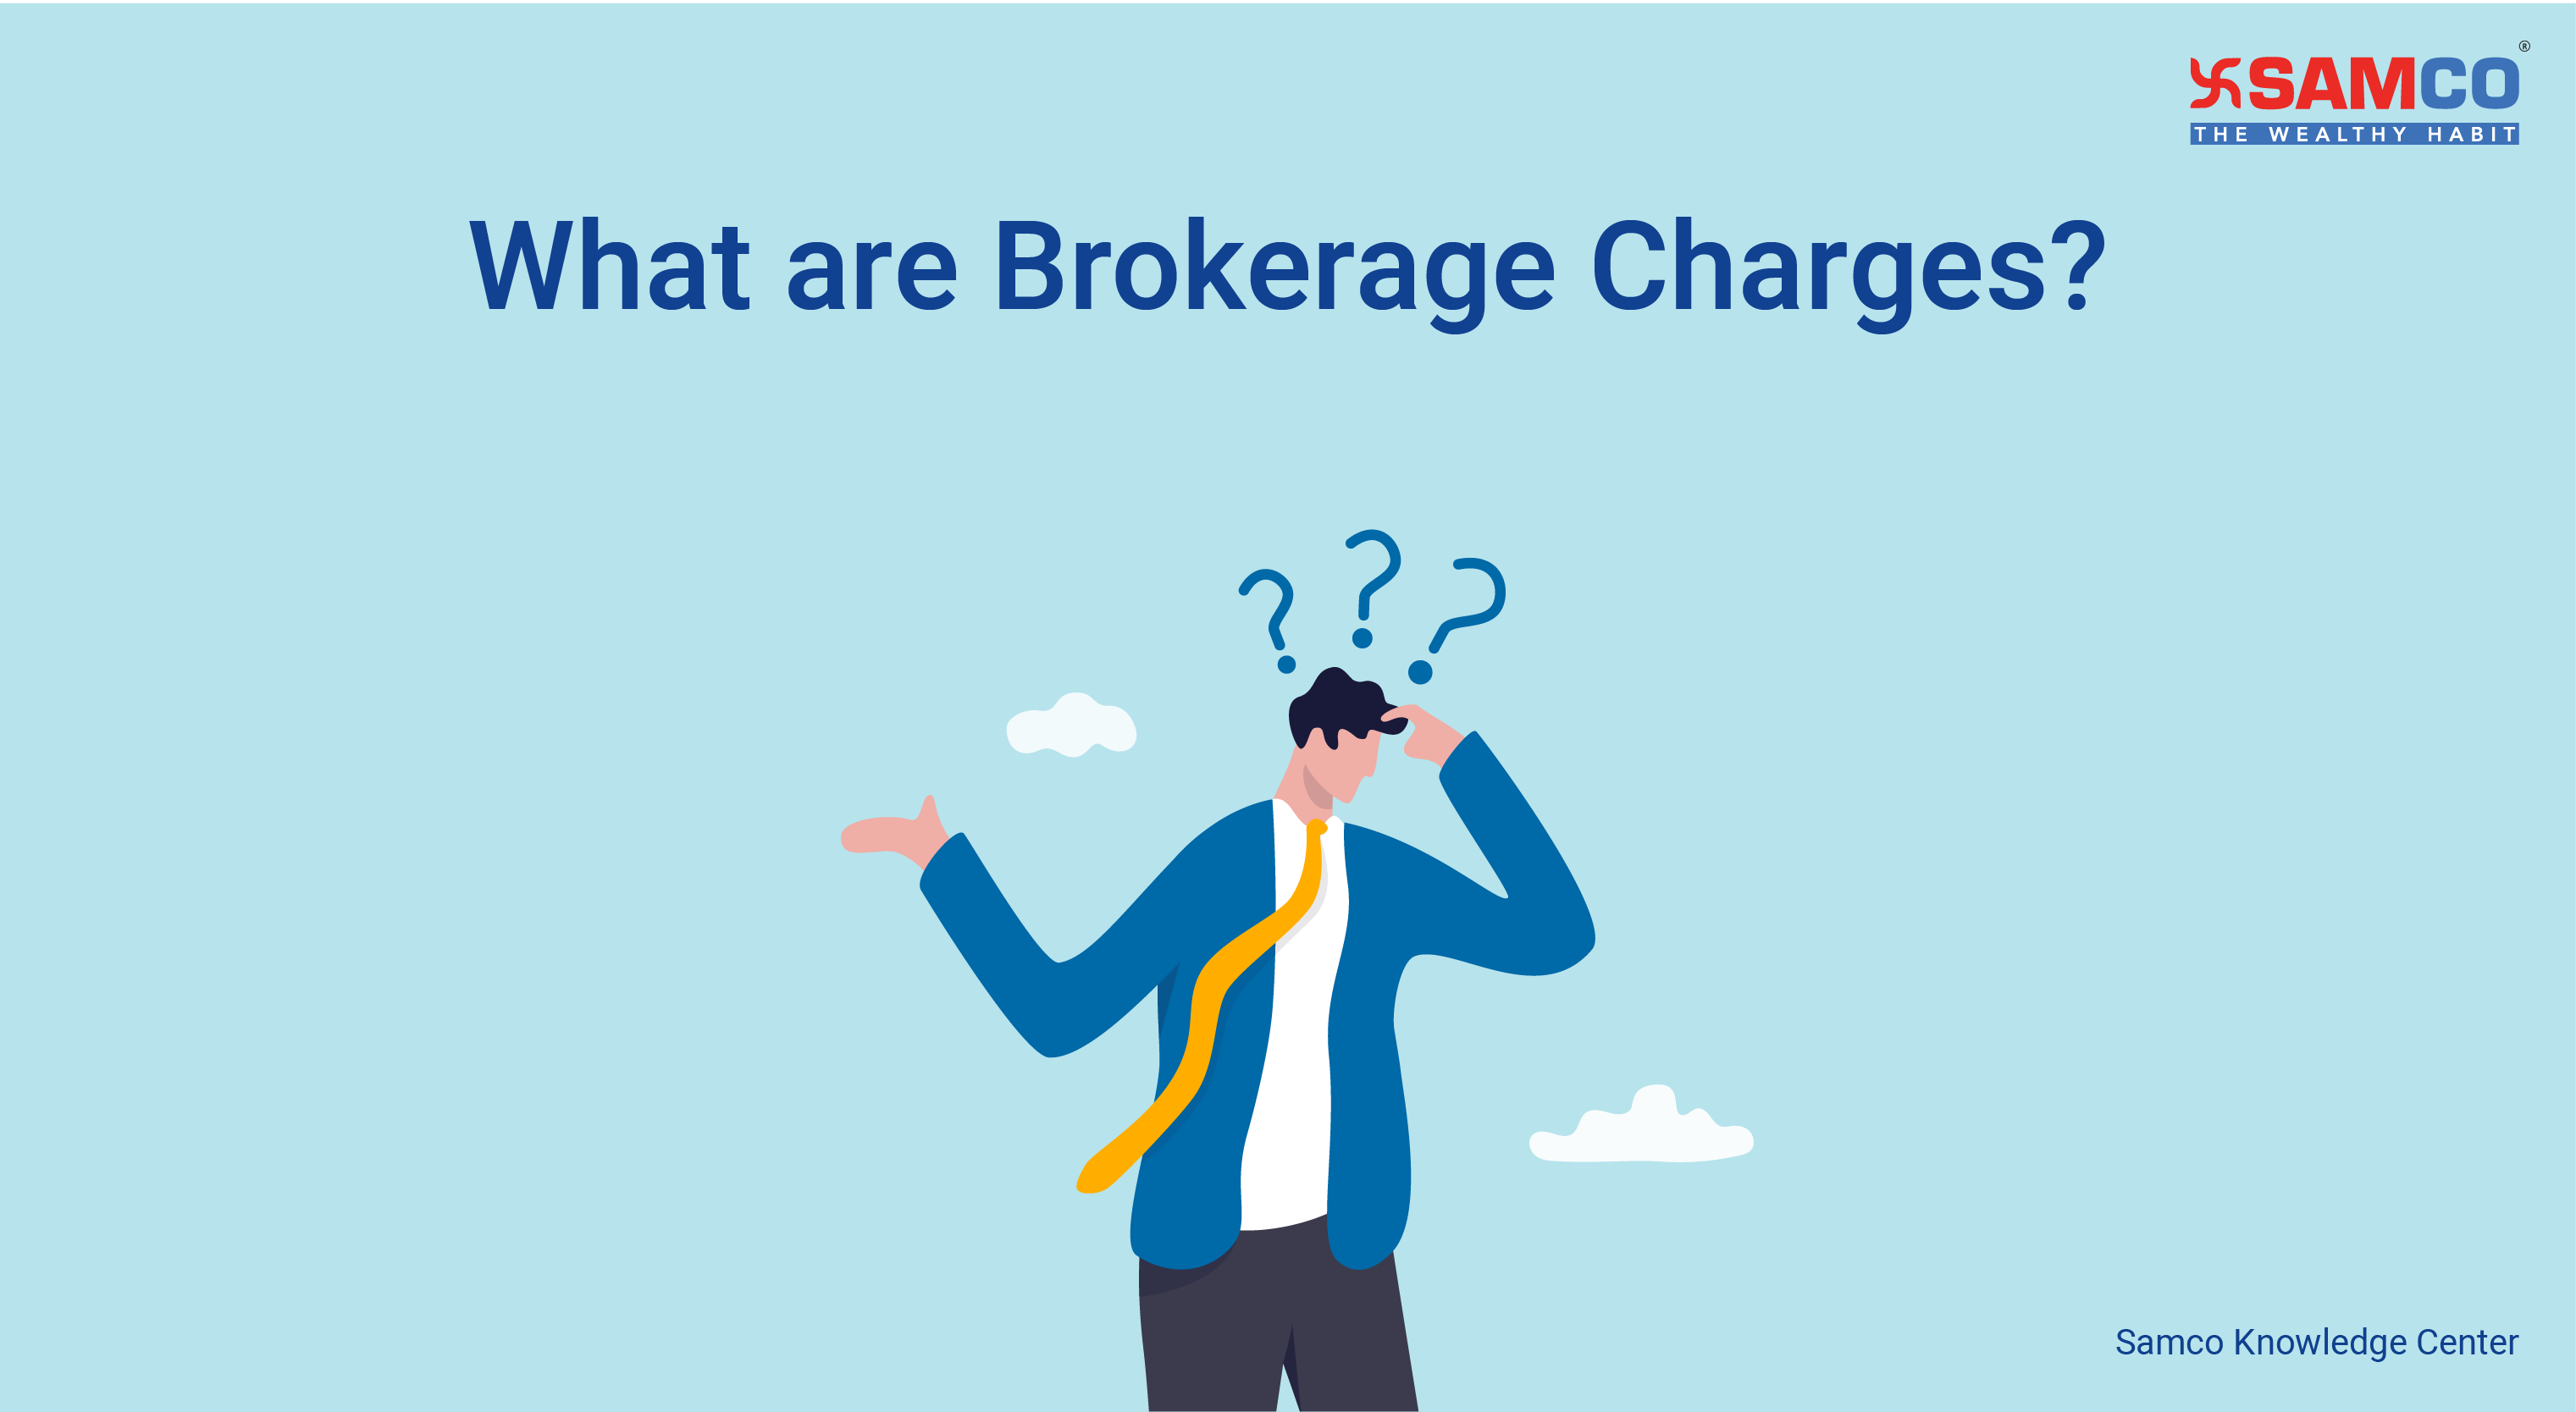 What are Brokerage Charges?